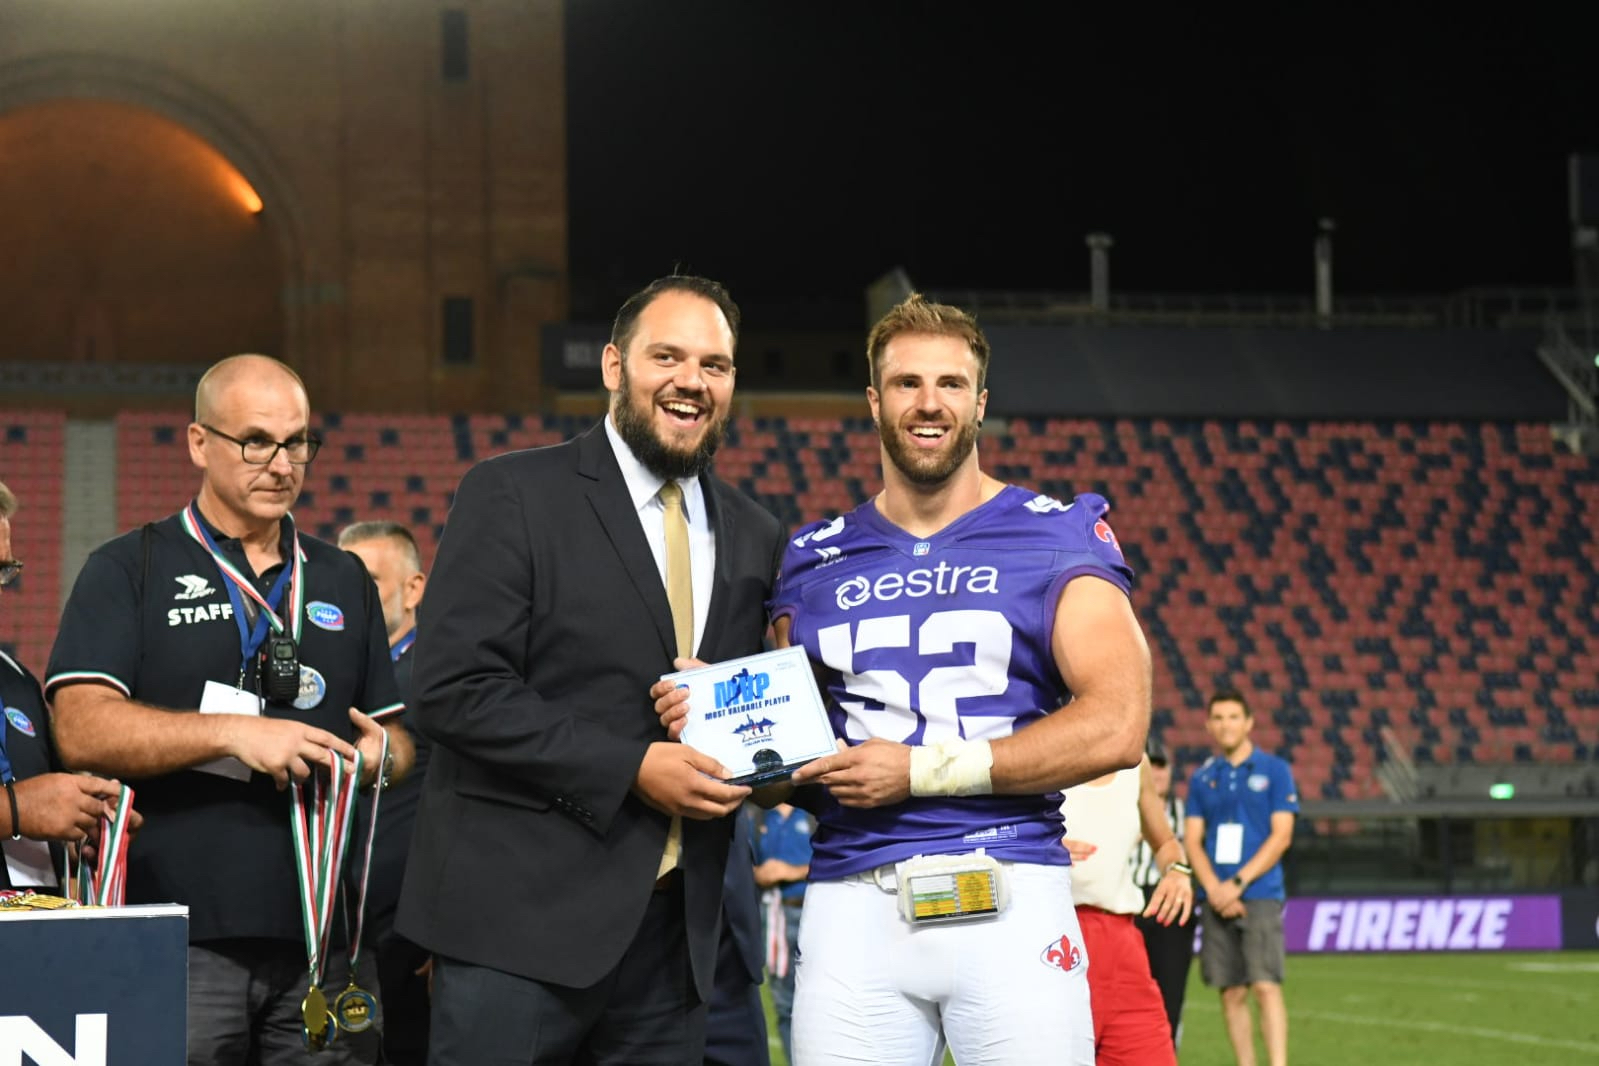  Pierre Trochet, President of IFAF, presents Guelfi Firenze’s defensive end Lorenzo Dalle Piagge with the MVP award in Bologna. Photo credit/ @Manuela Pellegrini. 